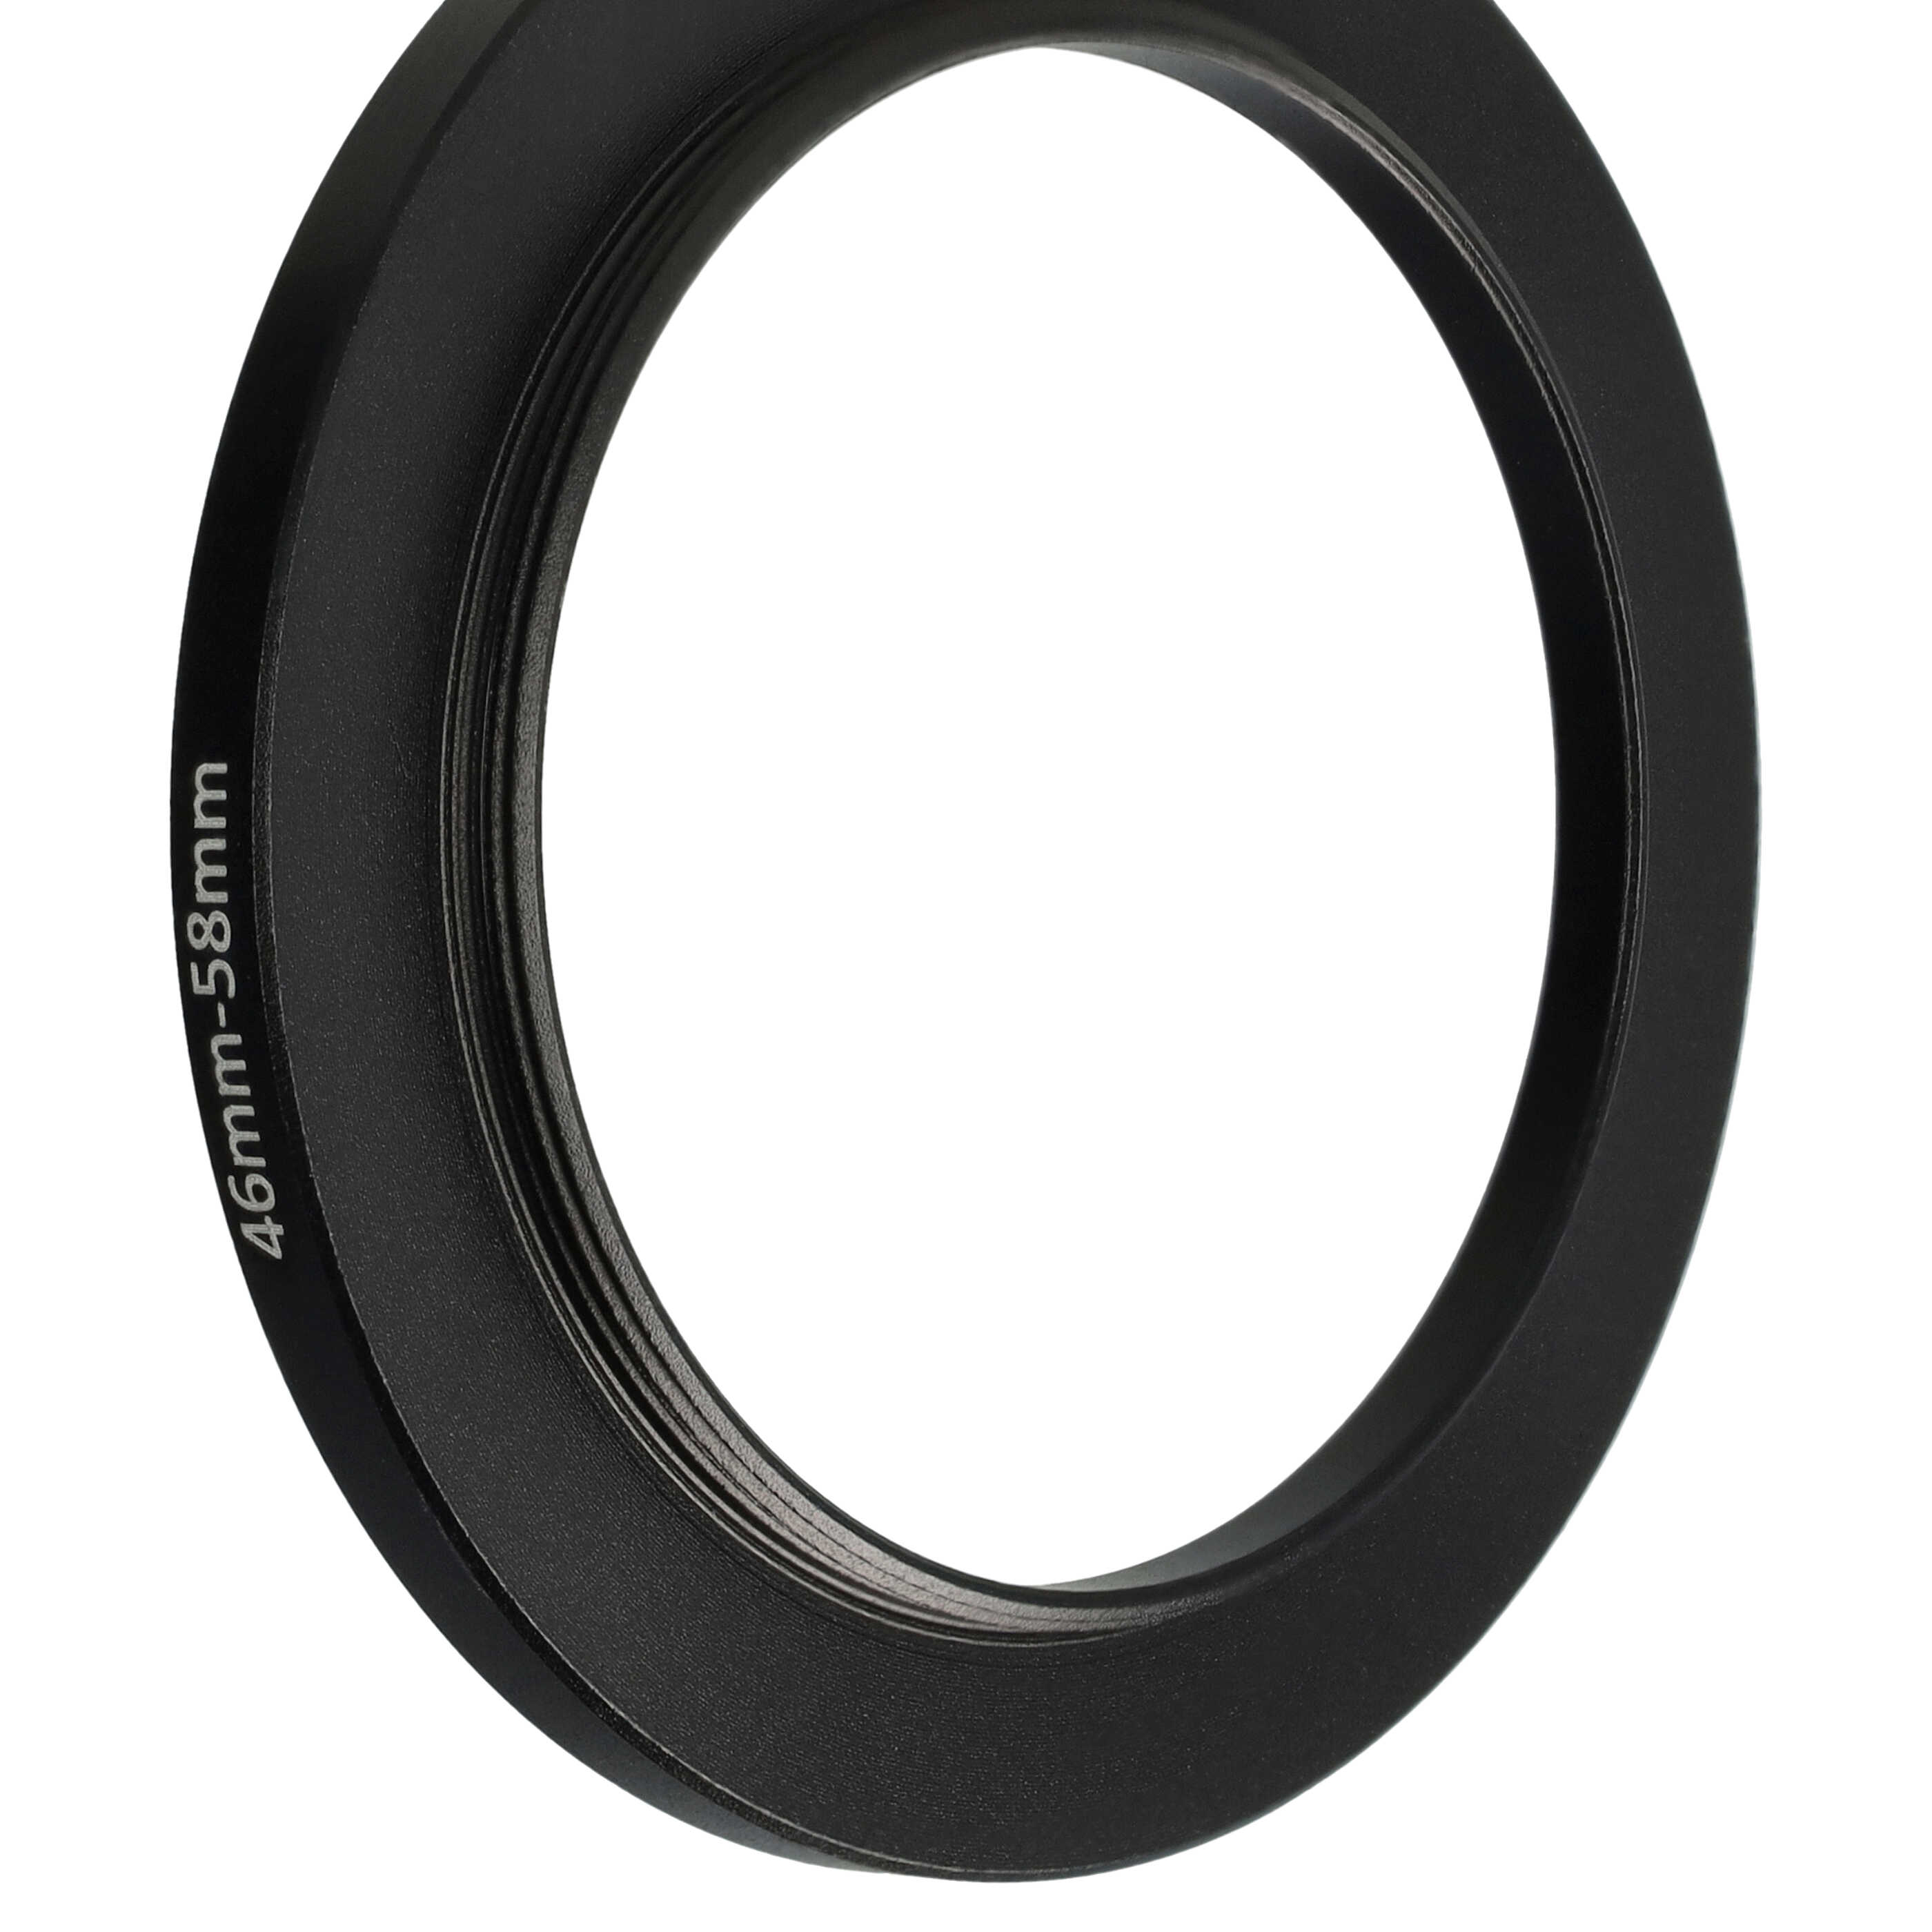 Step-Up Ring Adapter of 46 mm to 58 mmfor various Camera Lens - Filter Adapter